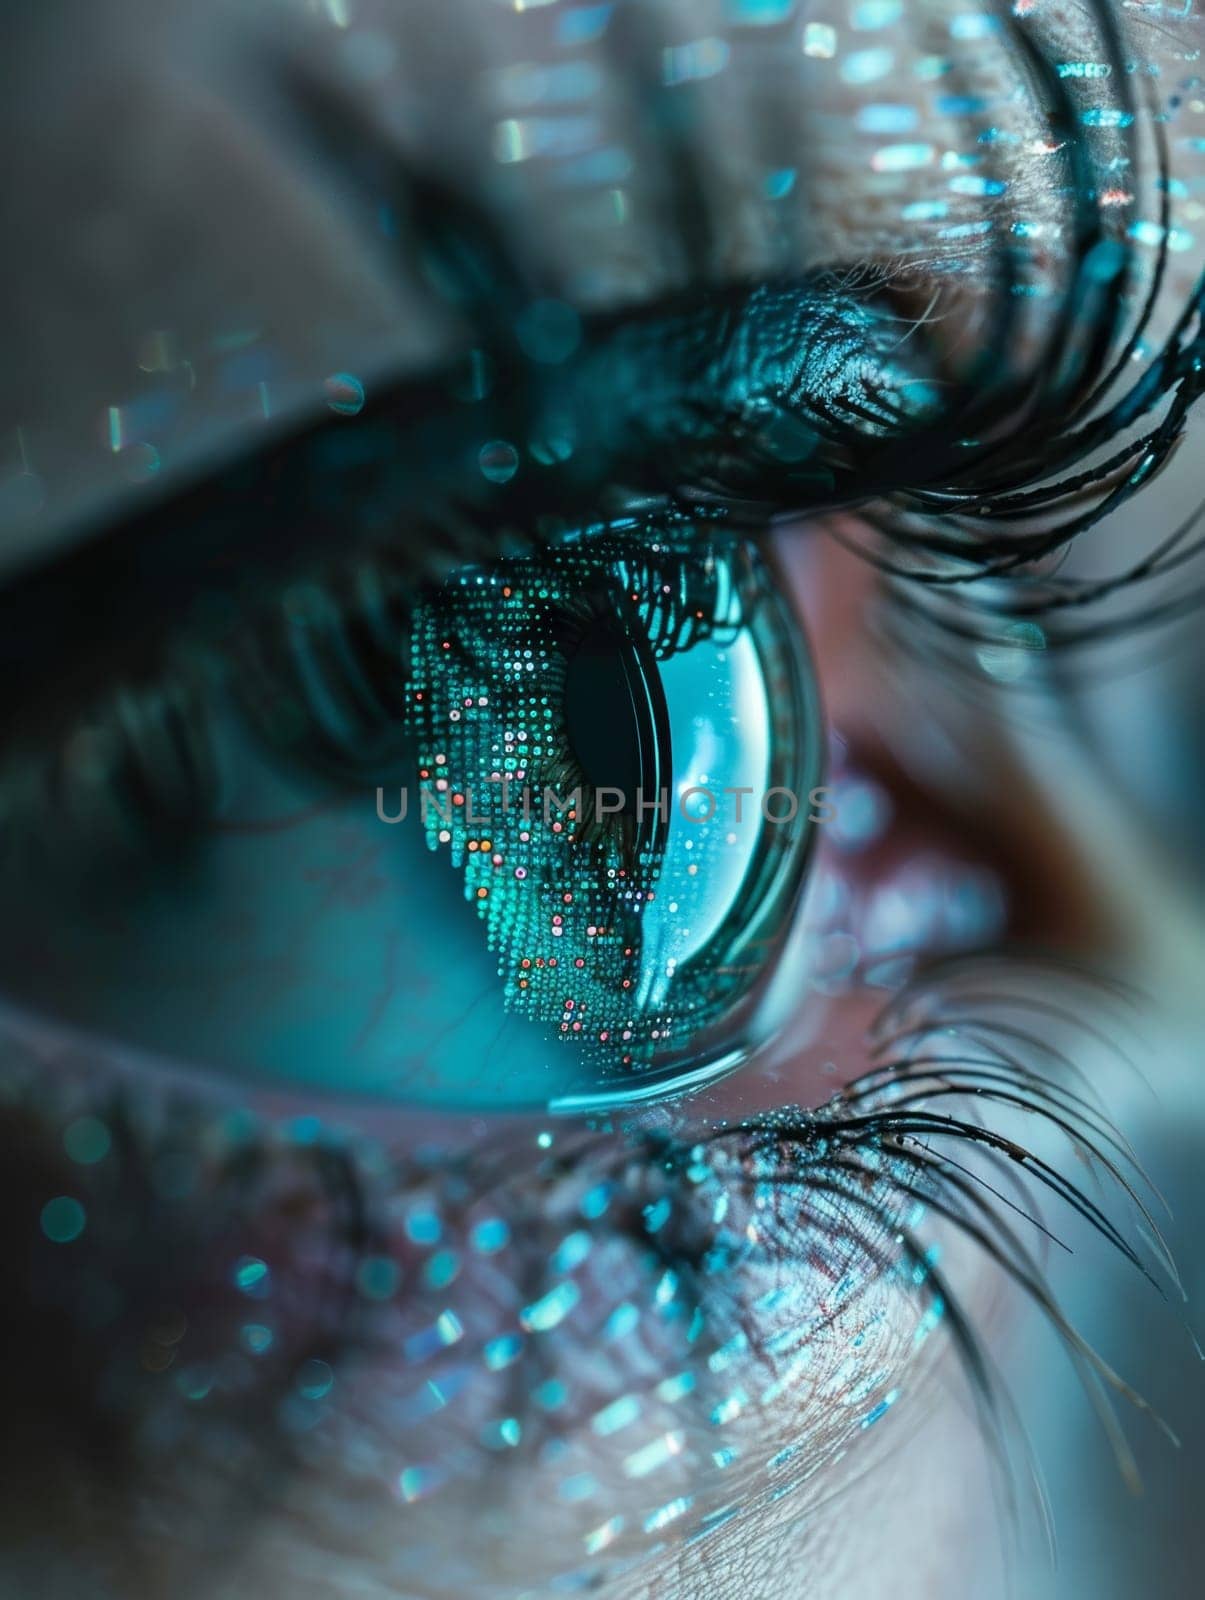 A captivating image of an eye, brilliantly illuminated with an array of cybernetic pixels and data points